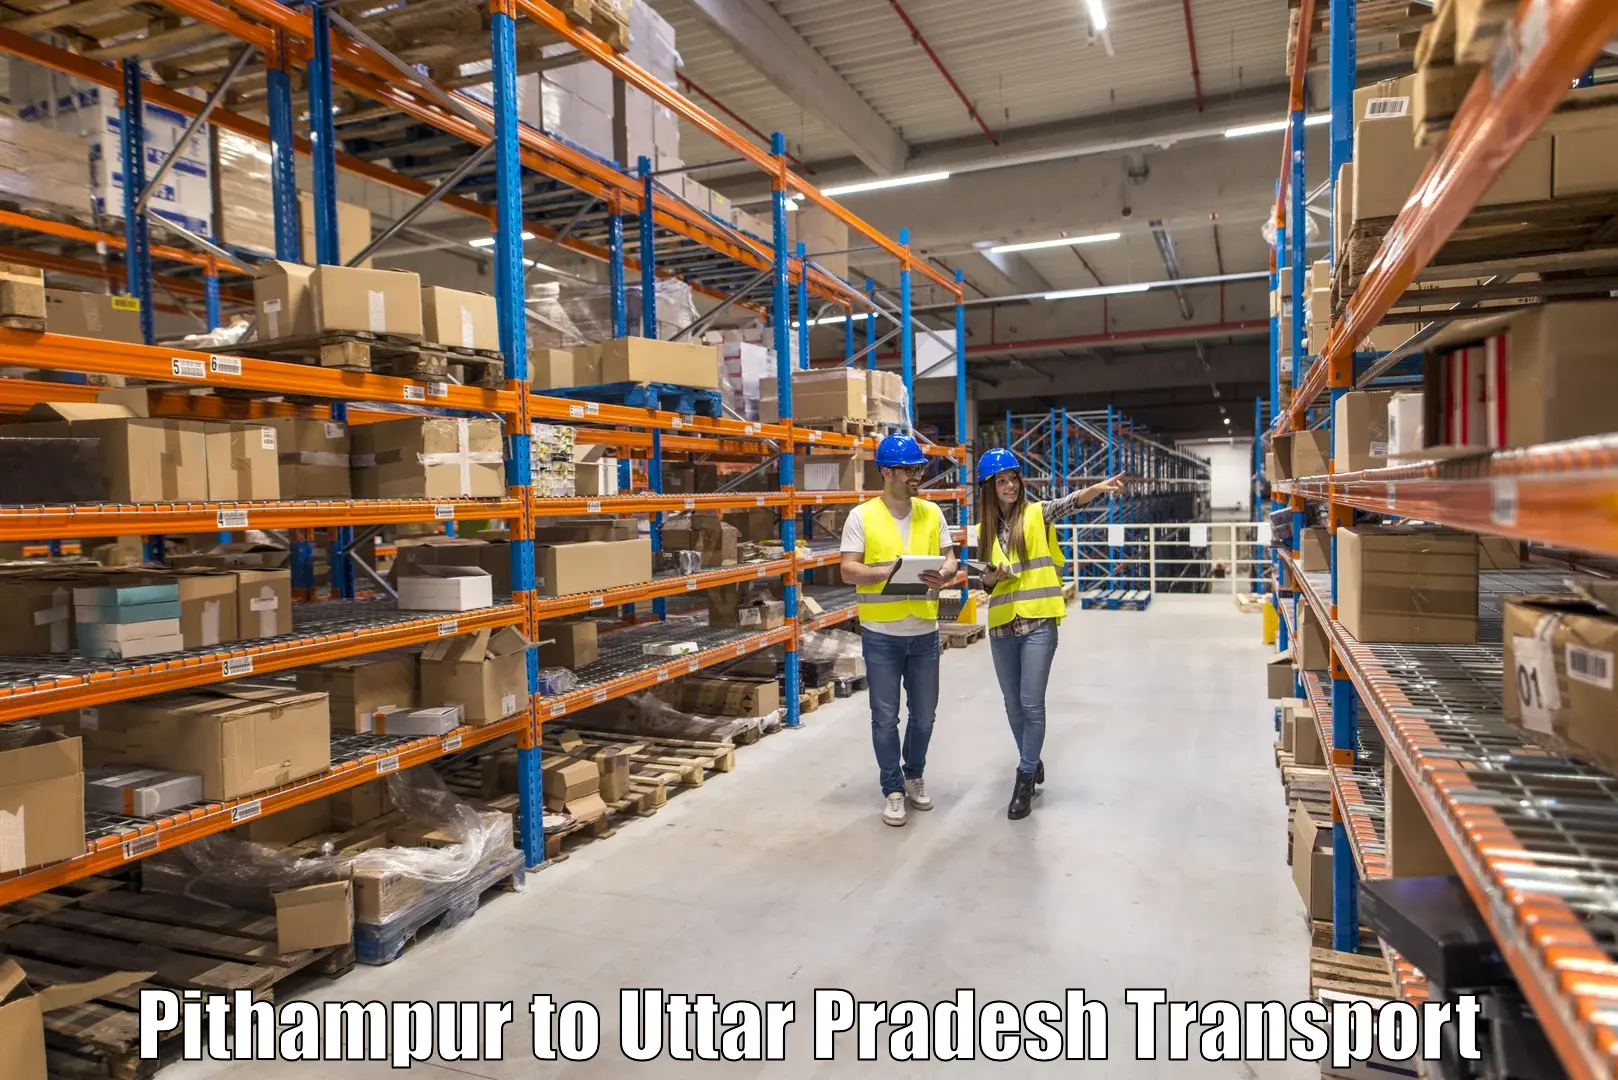 Container transport service Pithampur to Aligarh Muslim University